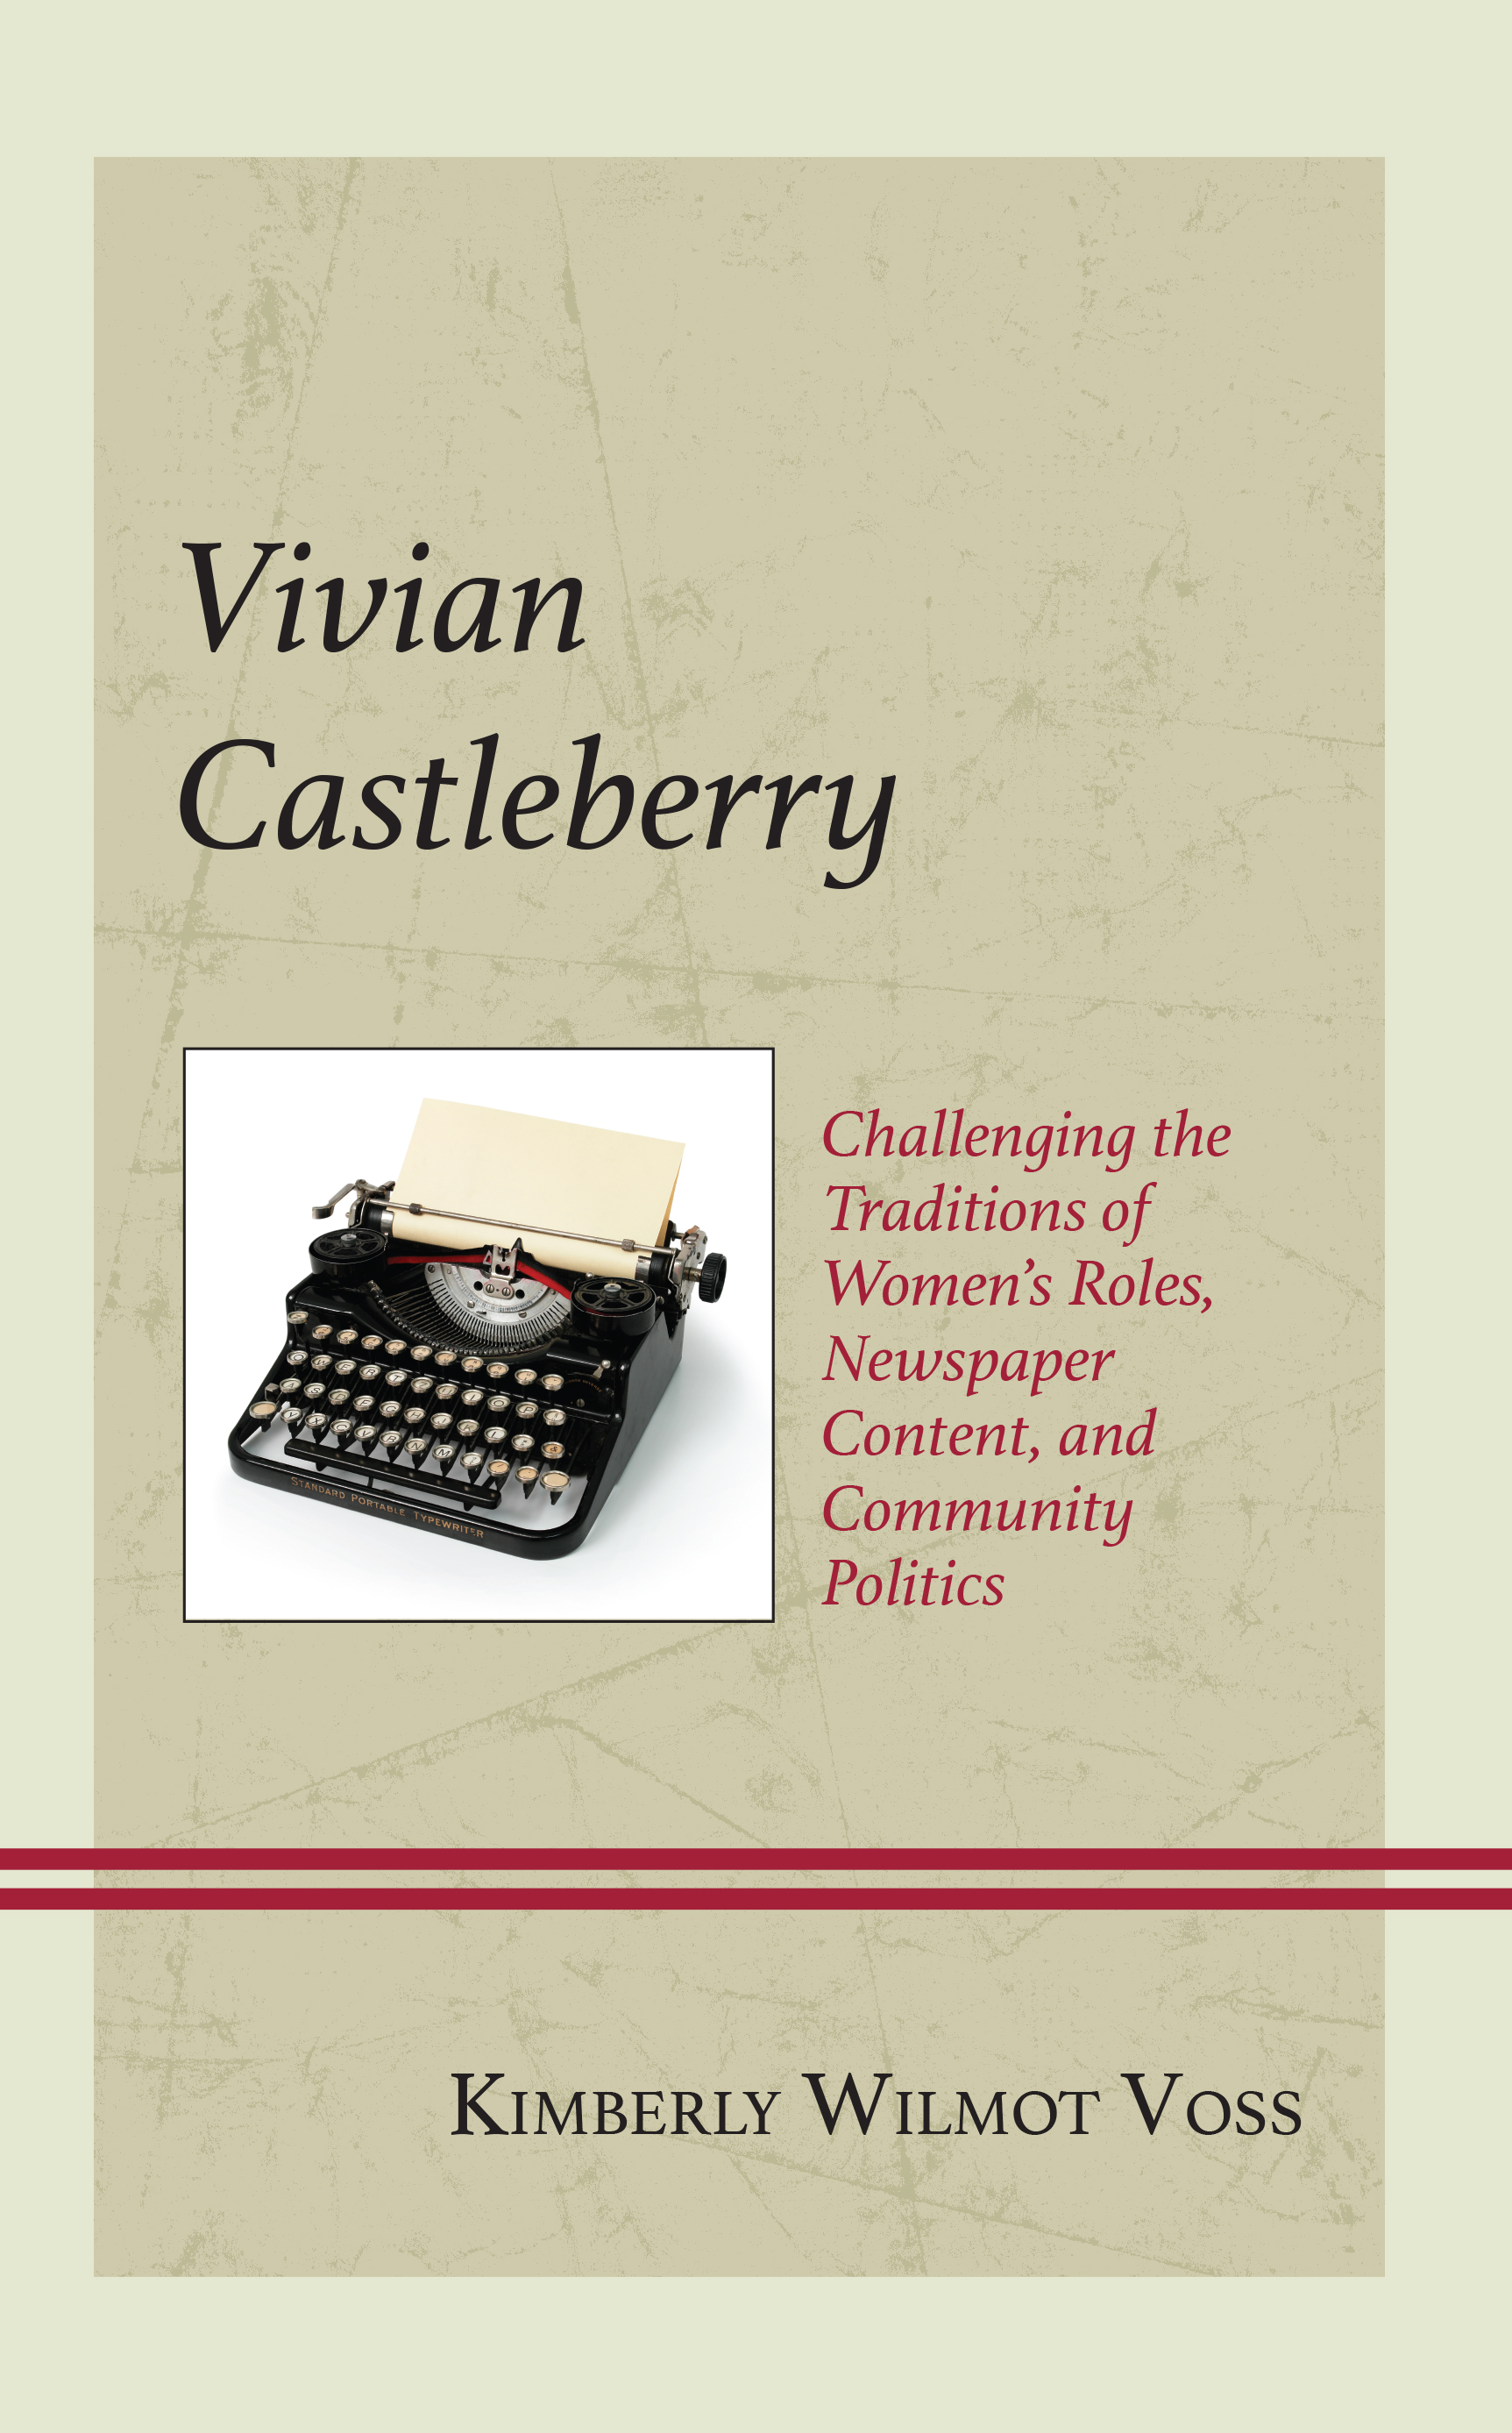 Vivian Castleberry: Challenging the Traditions of Women’s Roles, Newspaper Content, and Community Politics